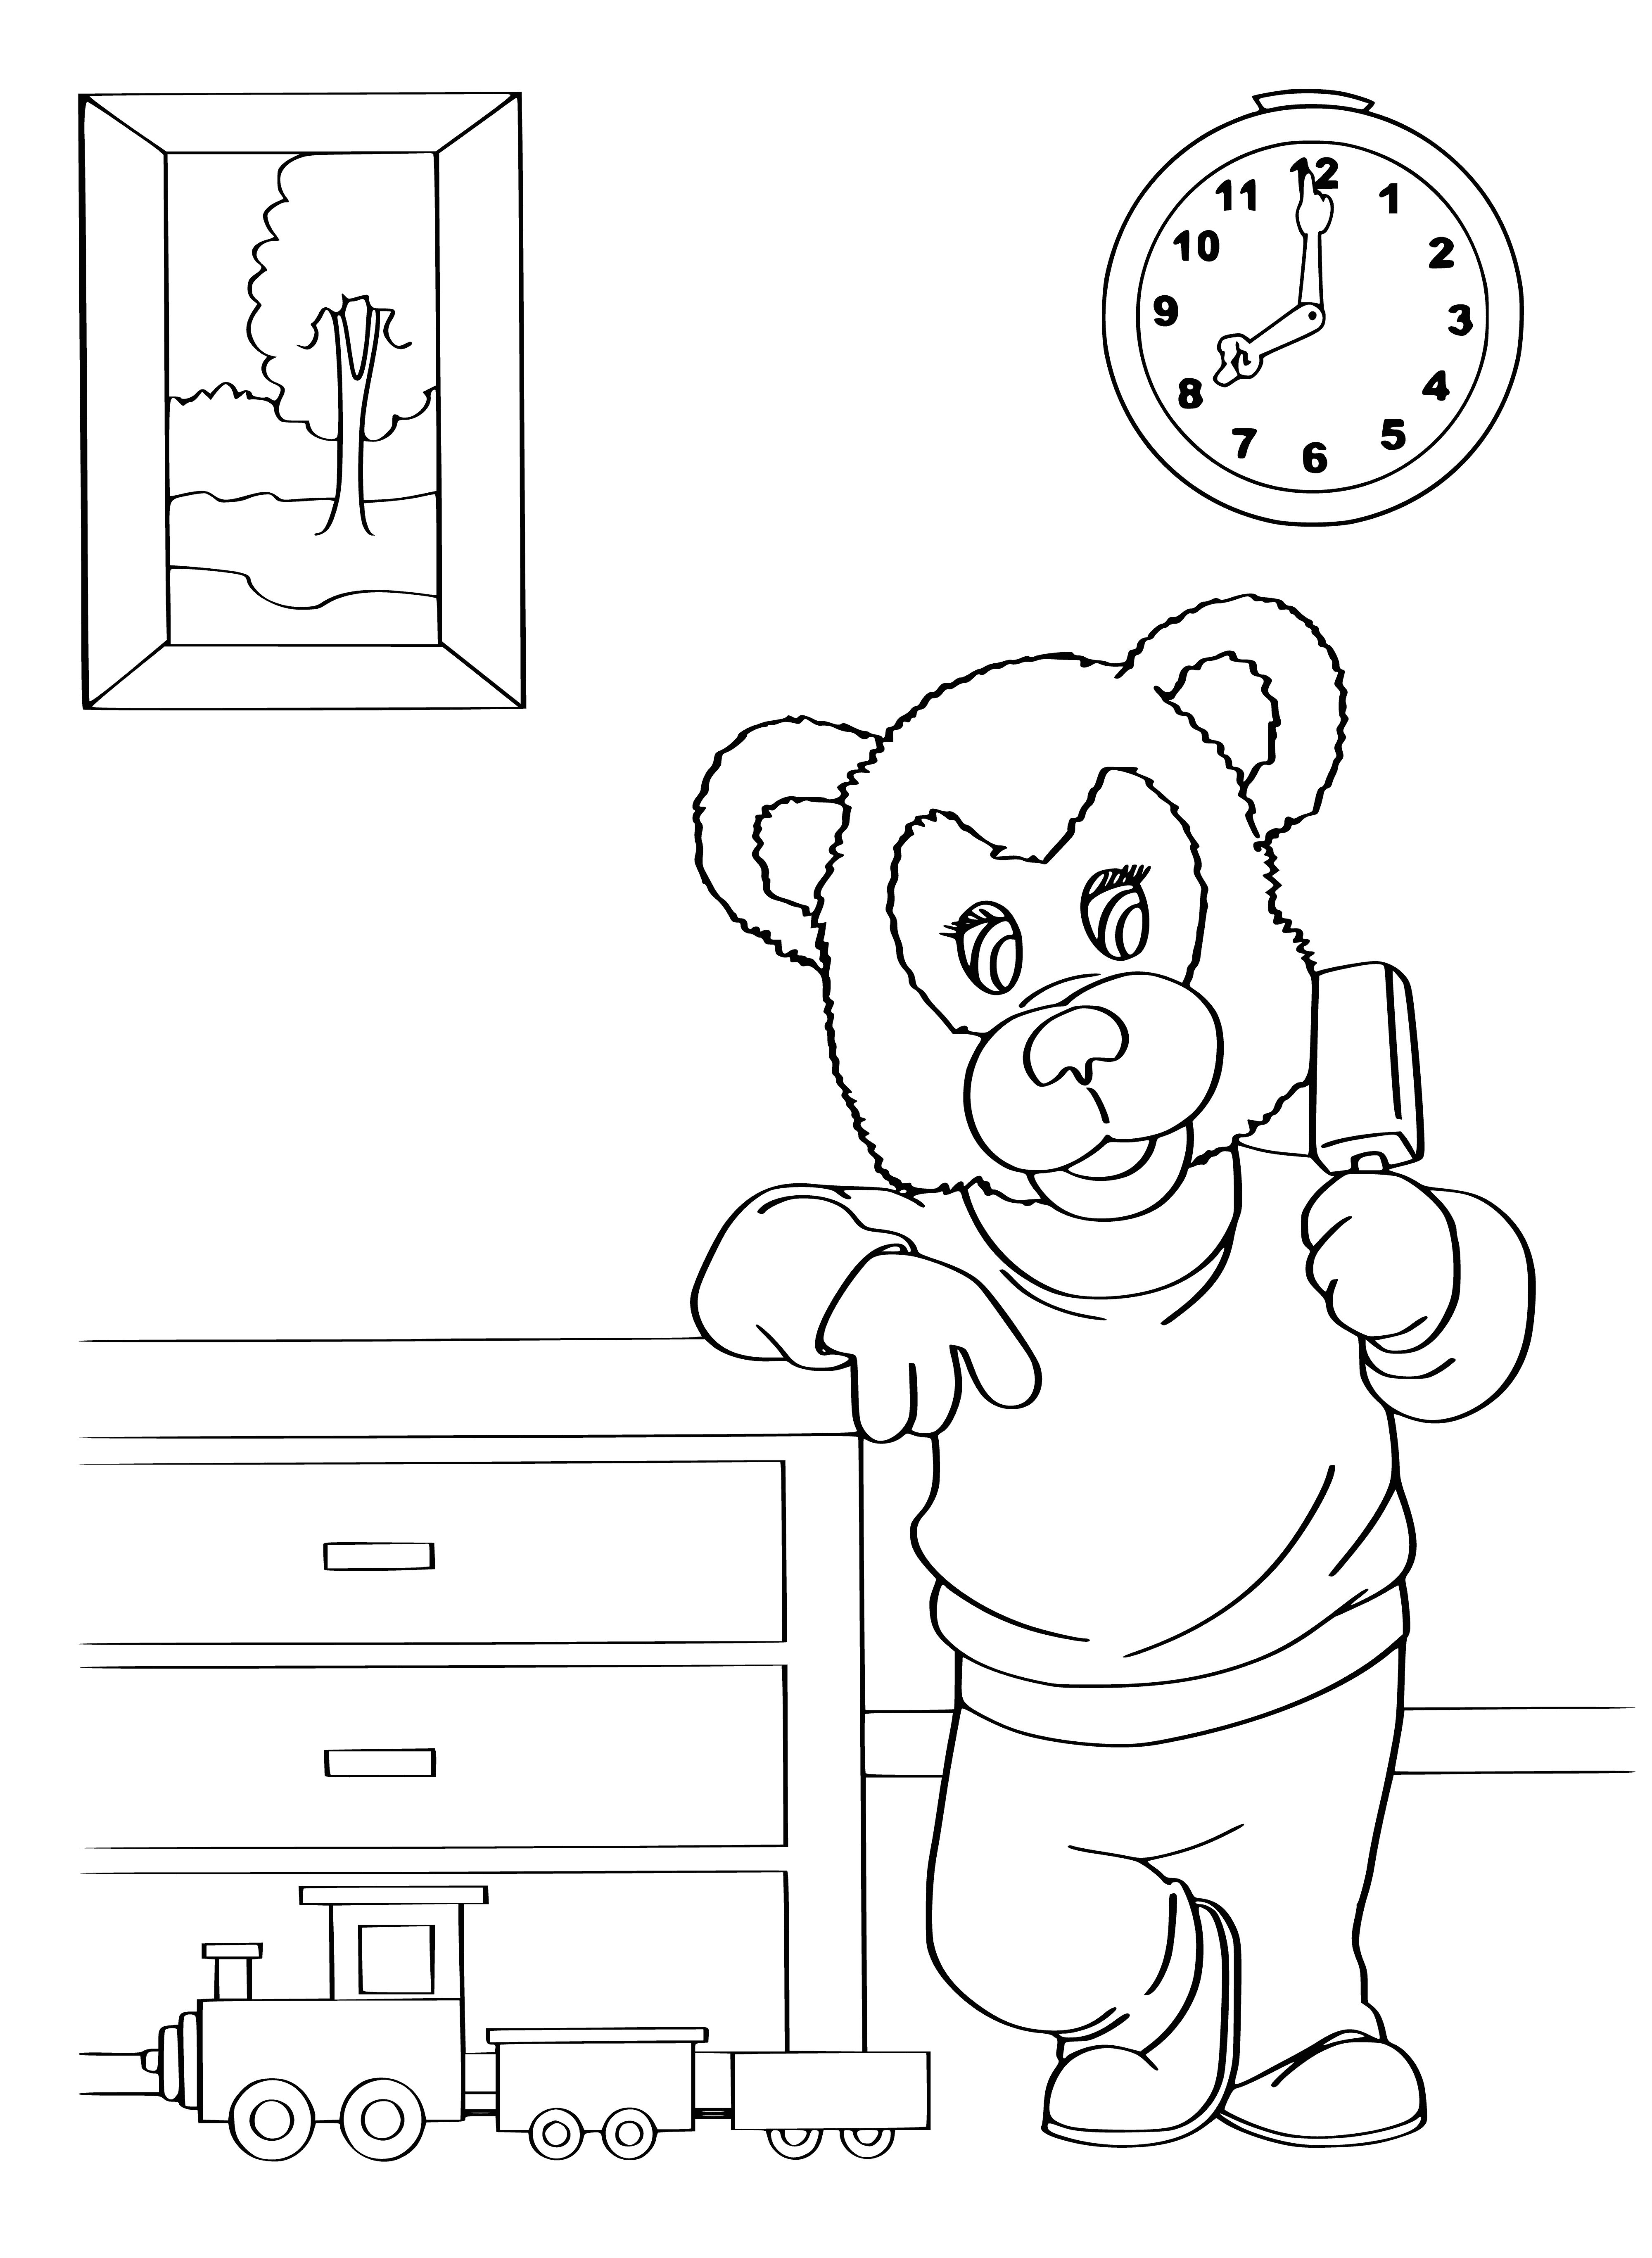 Mishutka coloring page